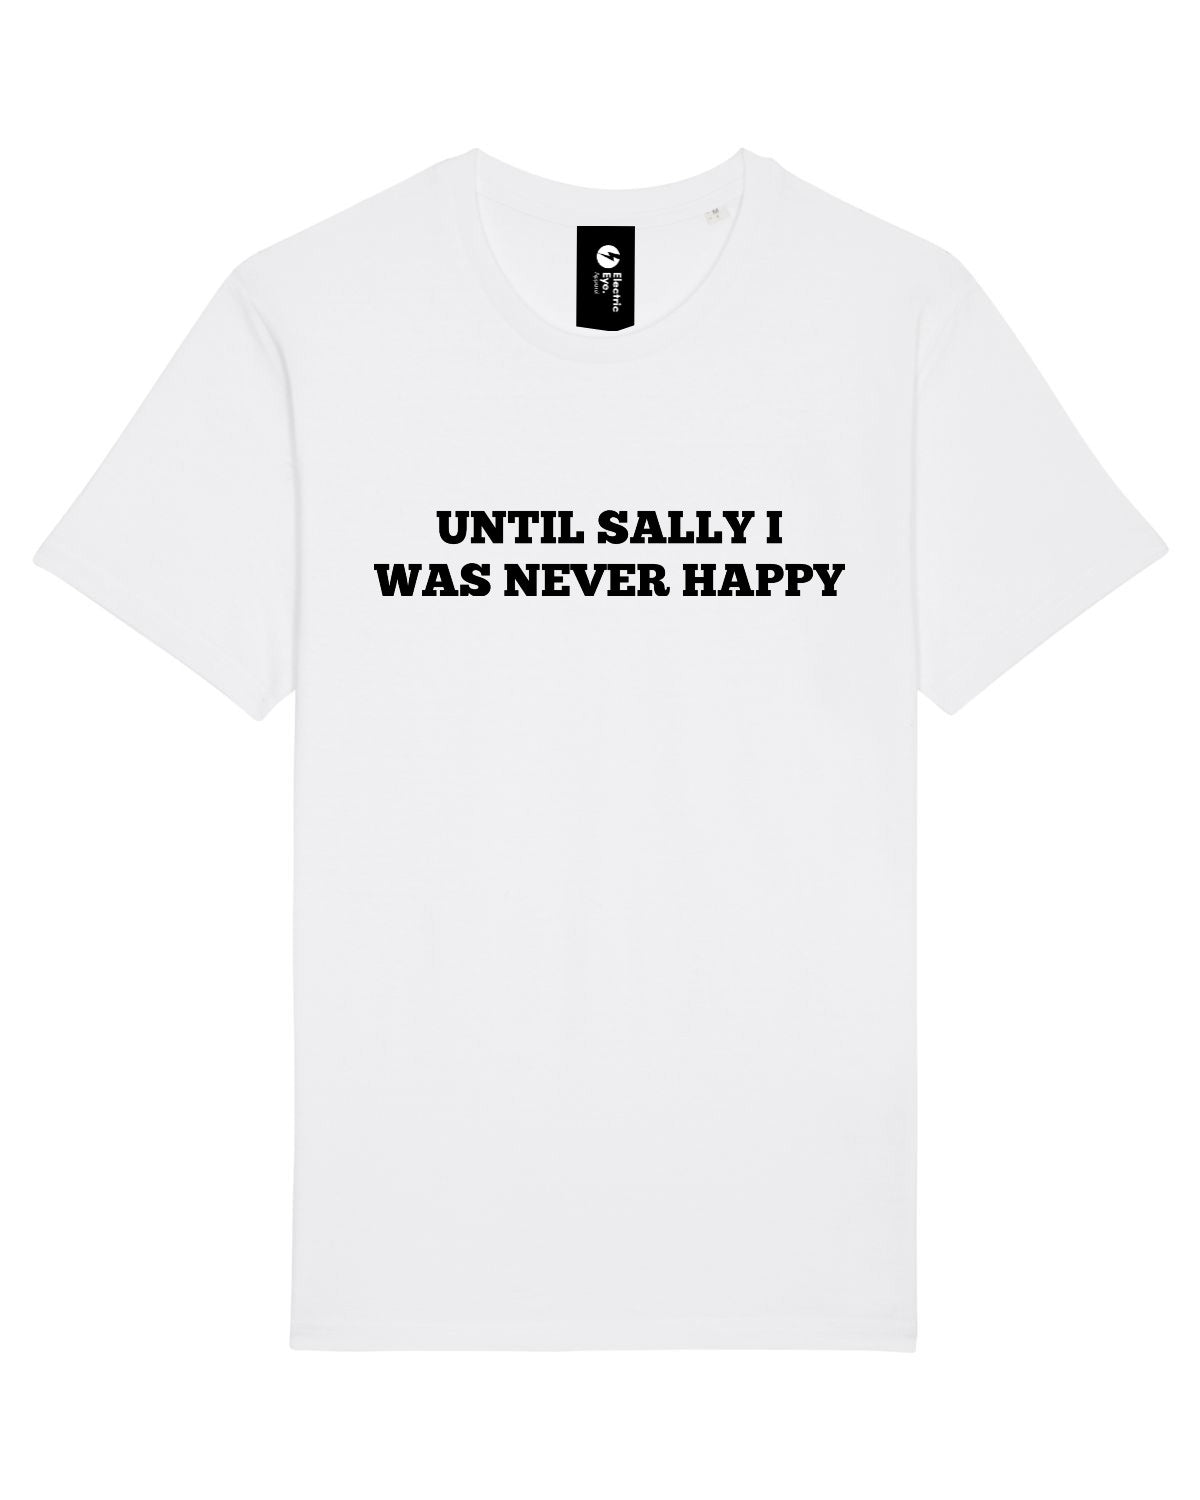 SAMPLE SALE 'UNTIL SALLY I WAS NEVER HAPPY' EMBROIDERED UNISEX MEDIUM FIT ORGANIC COTTON T-SHIRT (SIZE XXL)